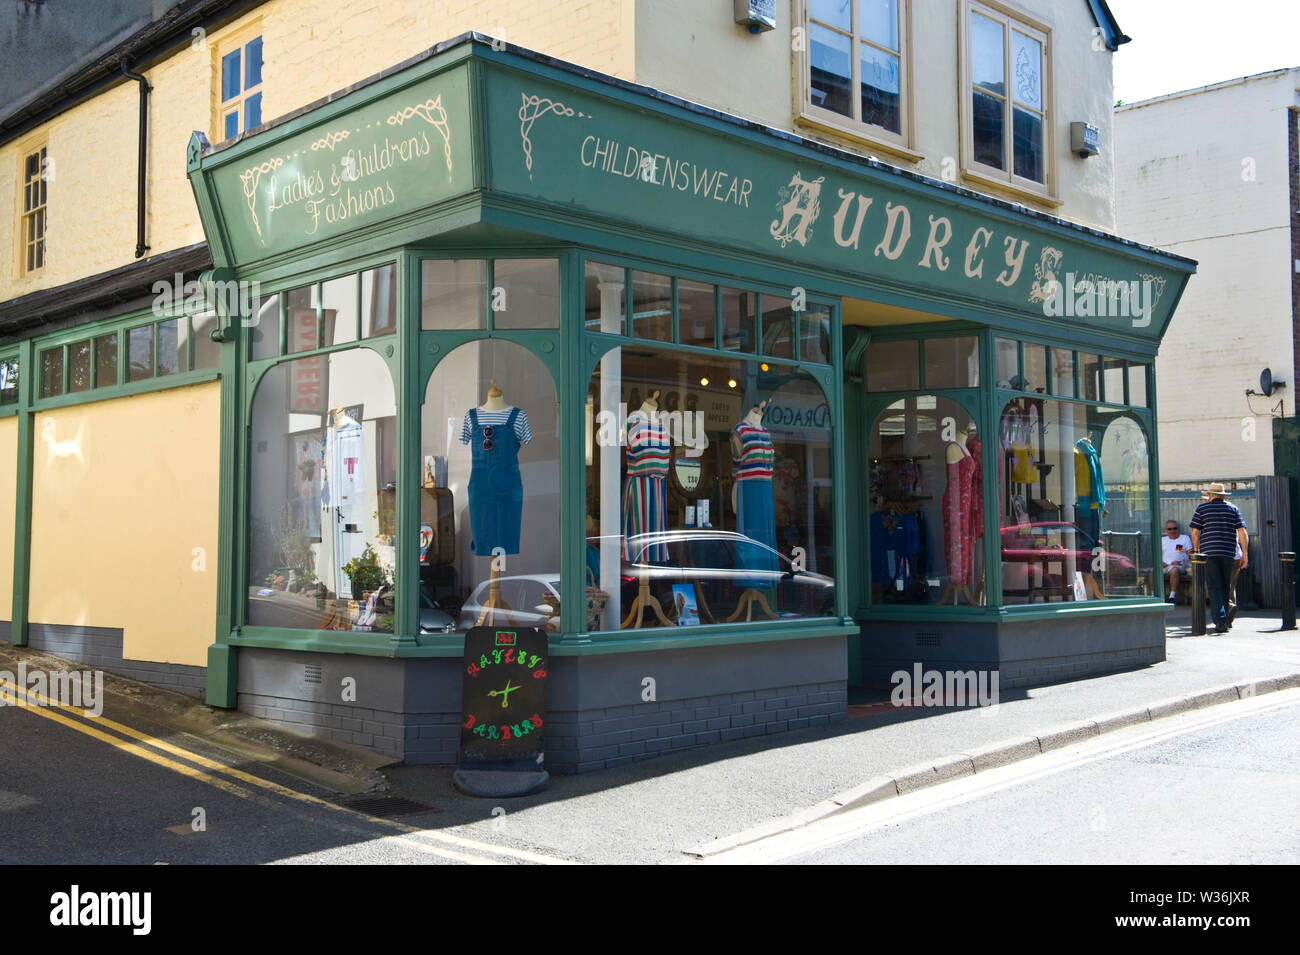 Audrey's ladies and children's fashion clothing in the town centre at Builth Wells Powys Wales UK Stock Photo